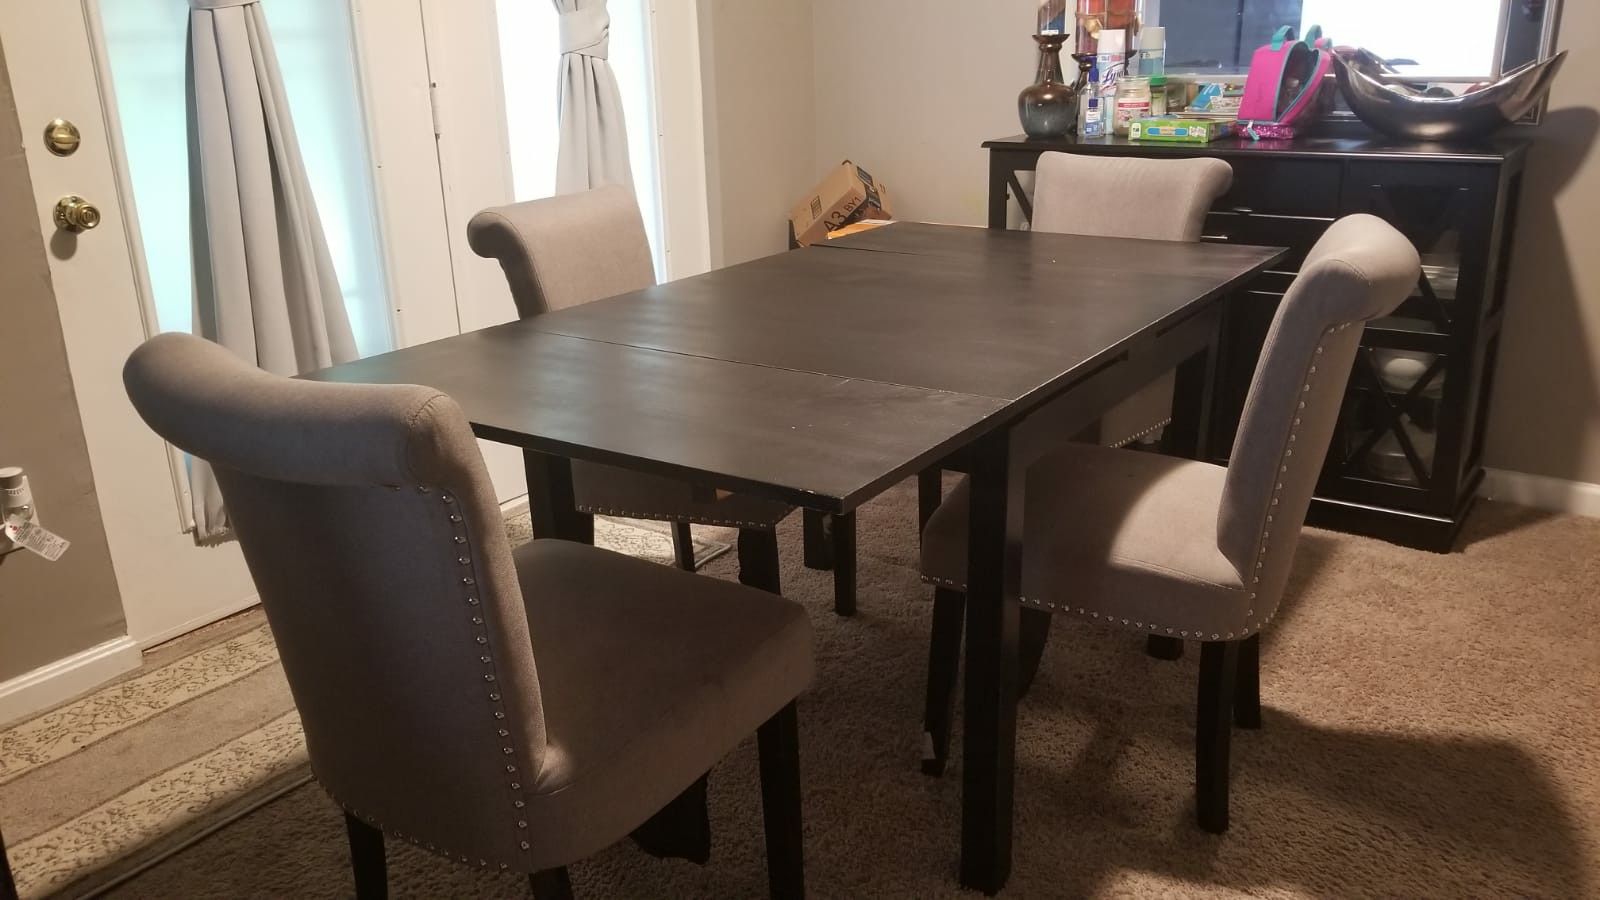 Dinning table and chairs